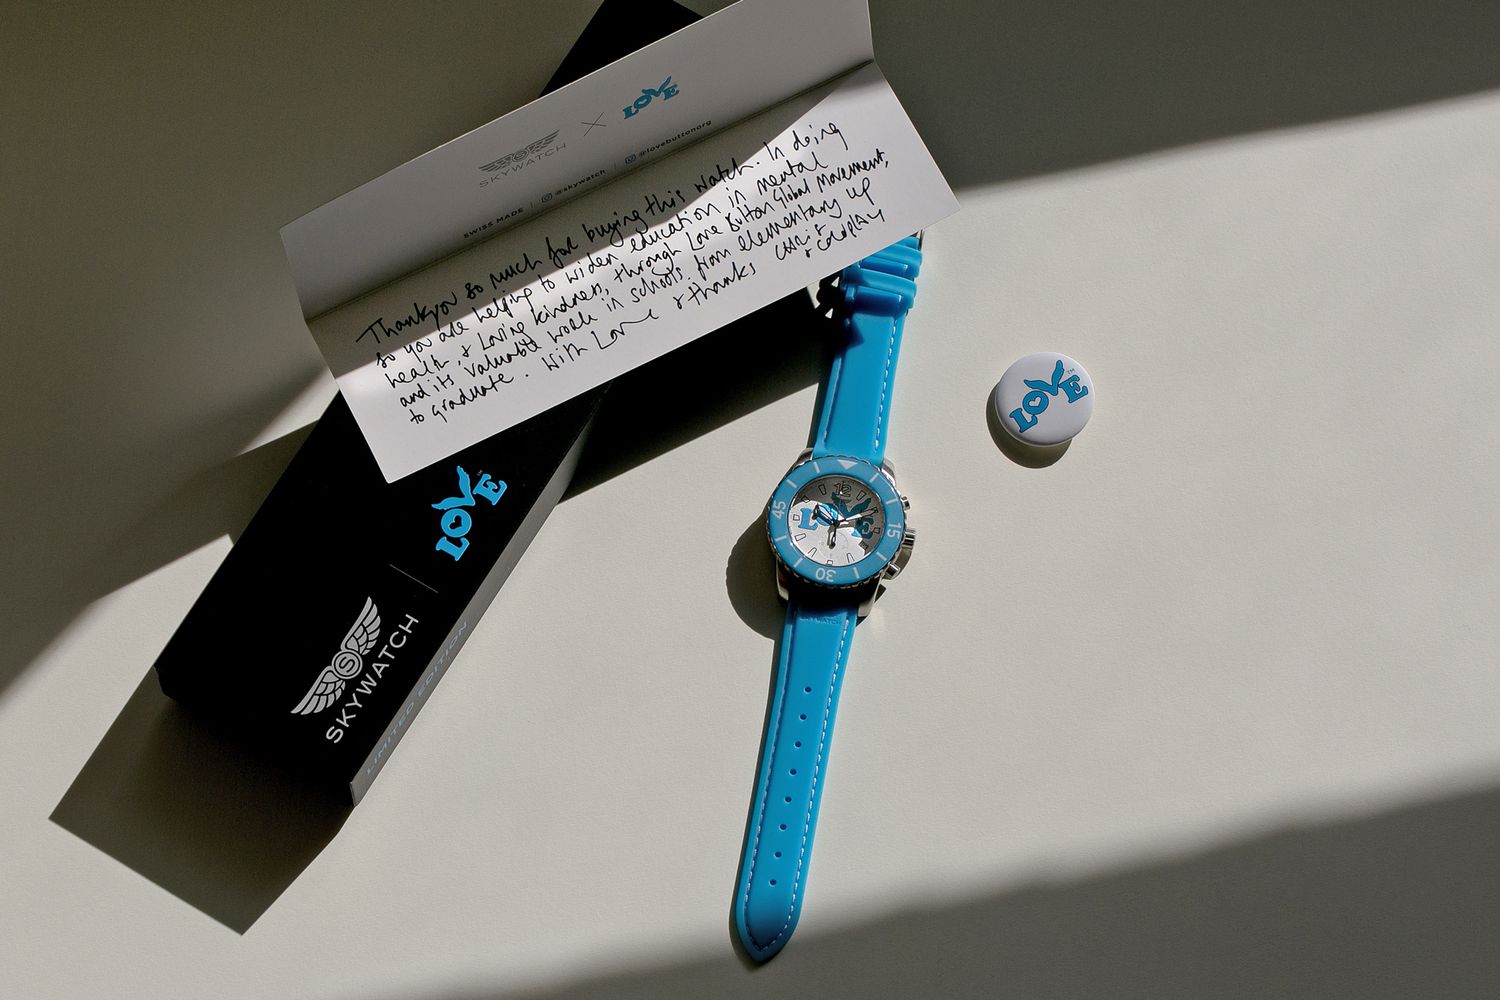 Coldplay’s Chris Martin Co-designs Limited Edition Skywatch X Love Button Watch Benefitting Love Button Global Movement